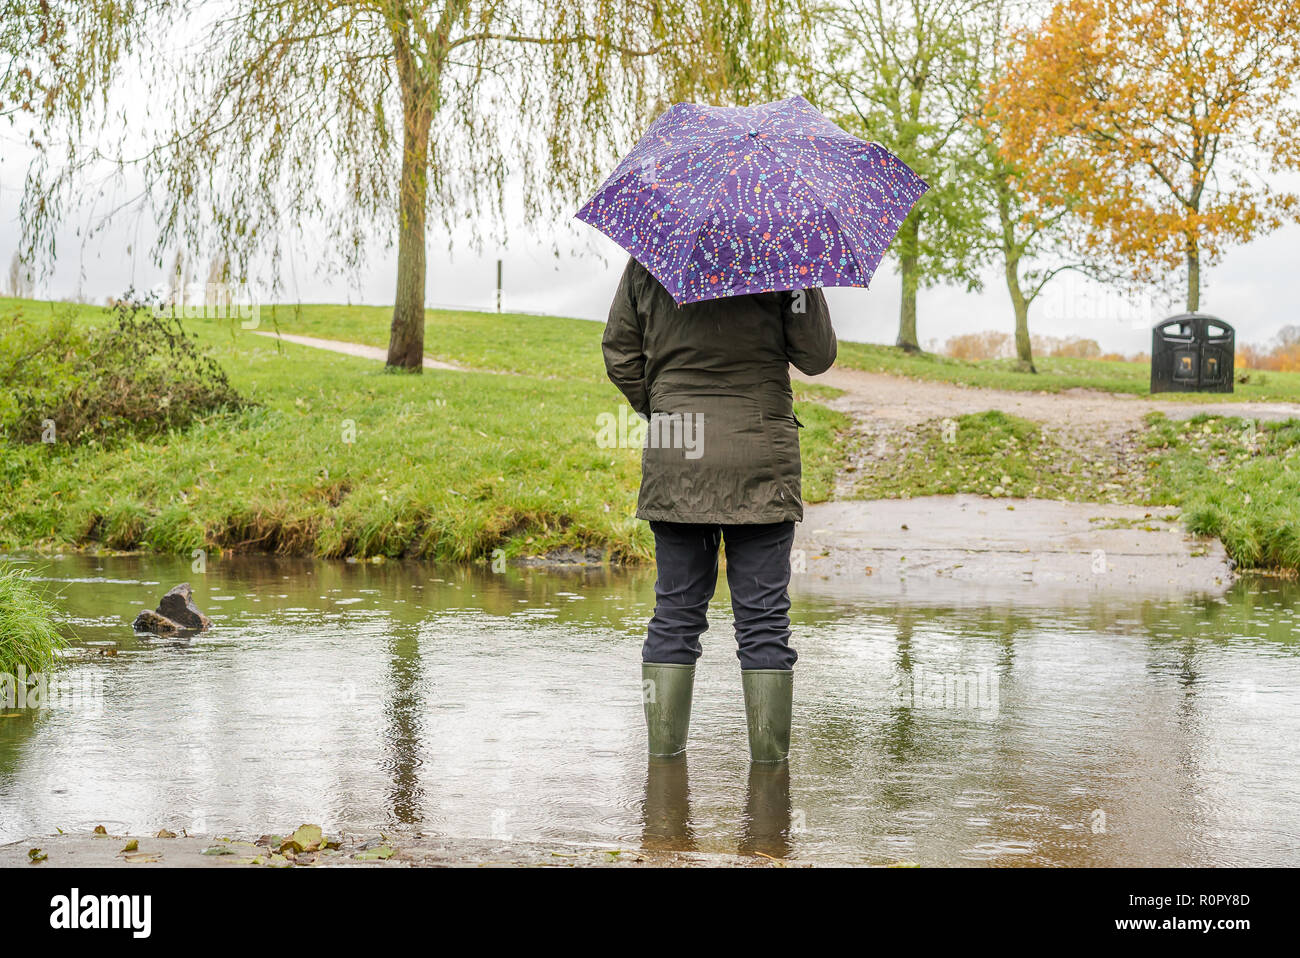 Kidderminster, UK. 7th November, 2018. UK weather: with today's persistent heavy showers (coupled with the significant overnight downpour), water levels are on the rise in Worcestershire with some areas experiencing flash flooding. A woman wearing wellies and holding an umbrella stands outdoors, rear view, isolated in rising water. Credit: Lee Hudson/Alamy Live News Stock Photo